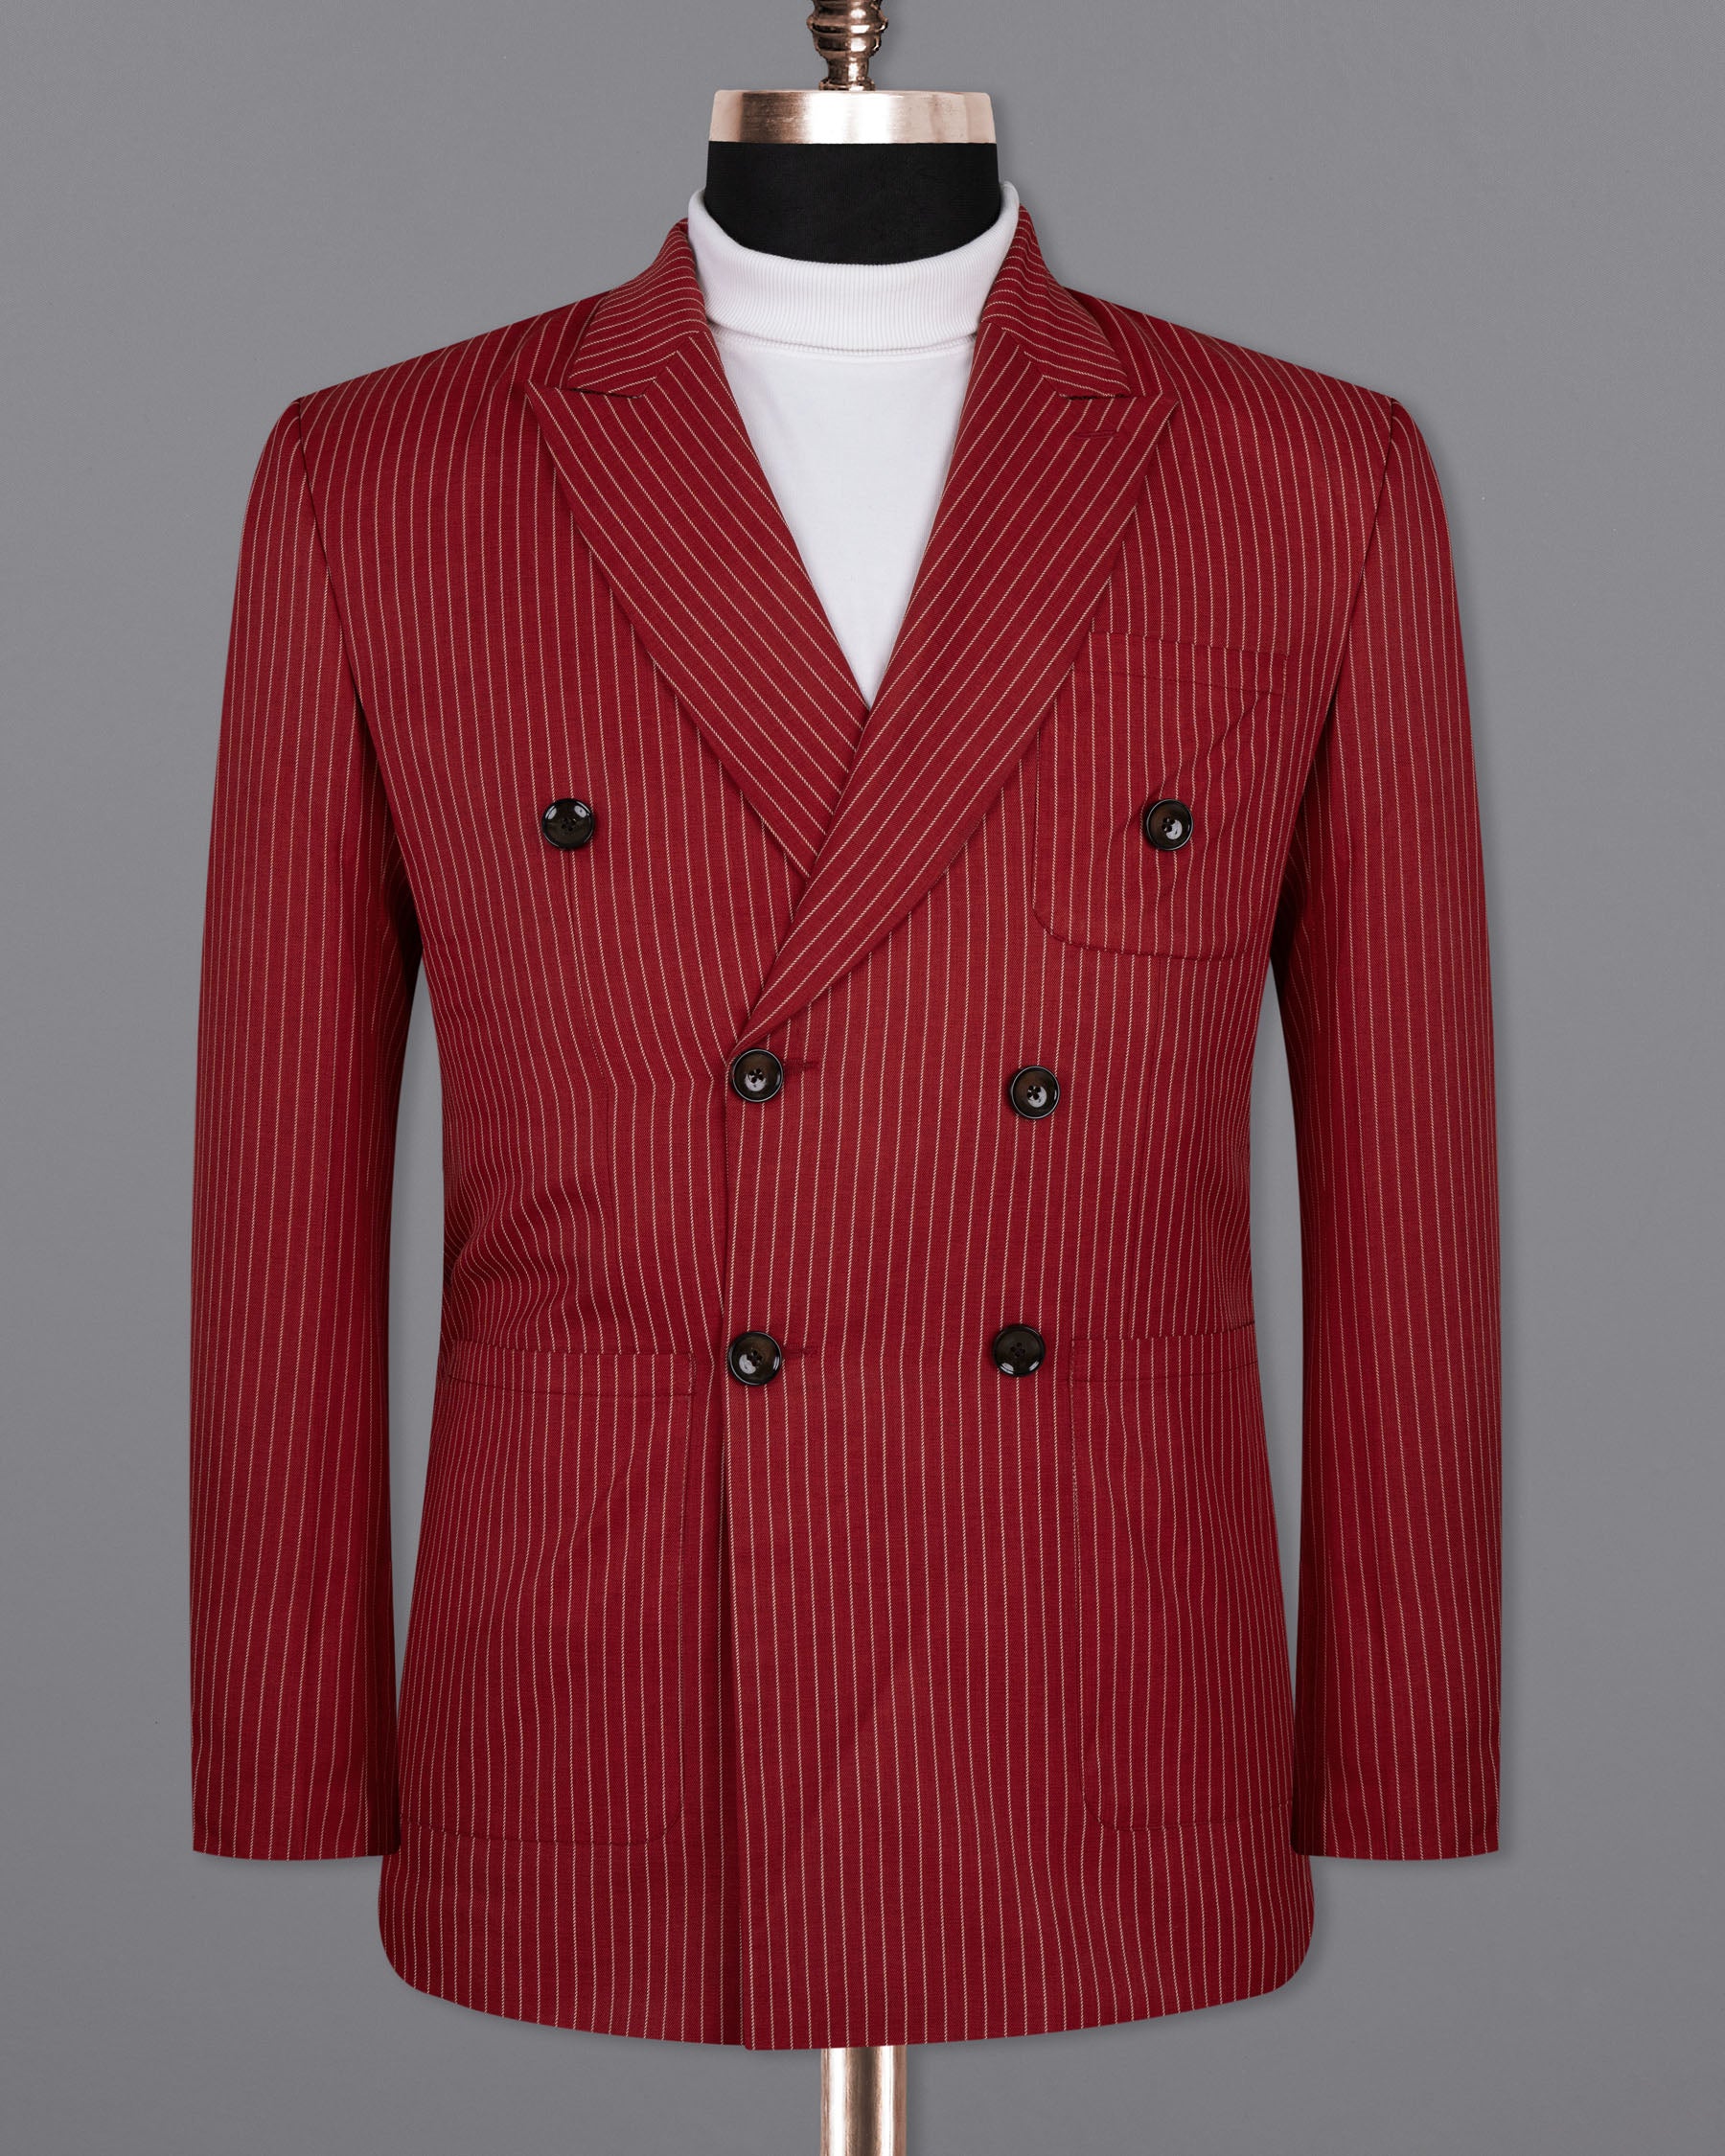 Merlot Red Striped Wool Rich Double-Breasted Sports Blazer BL1506-DB-PP-36, BL1506-DB-PP-38, BL1506-DB-PP-40, BL1506-DB-PP-42, BL1506-DB-PP-44, BL1506-DB-PP-46, BL1506-DB-PP-48, BL1506-DB-PP-50, BL1506-DB-PP-52, BL1506-DB-PP-54, BL1506-DB-PP-56, BL1506-DB-PP-58, BL1506-DB-PP-60